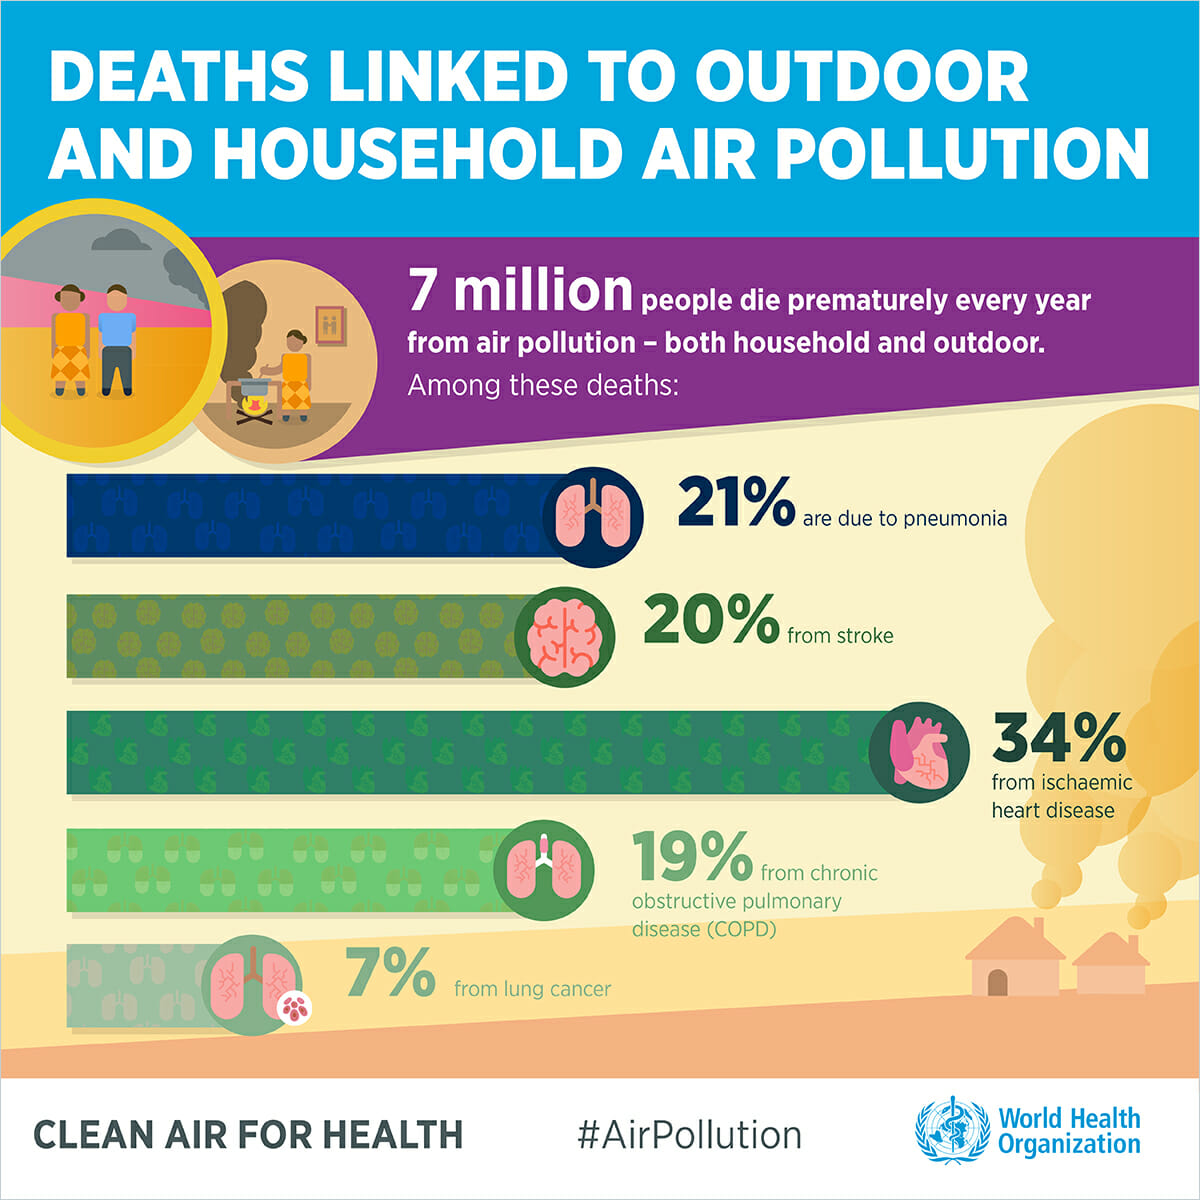 9 out of 10 people worldwide breathe polluted air, but more countries are taking action